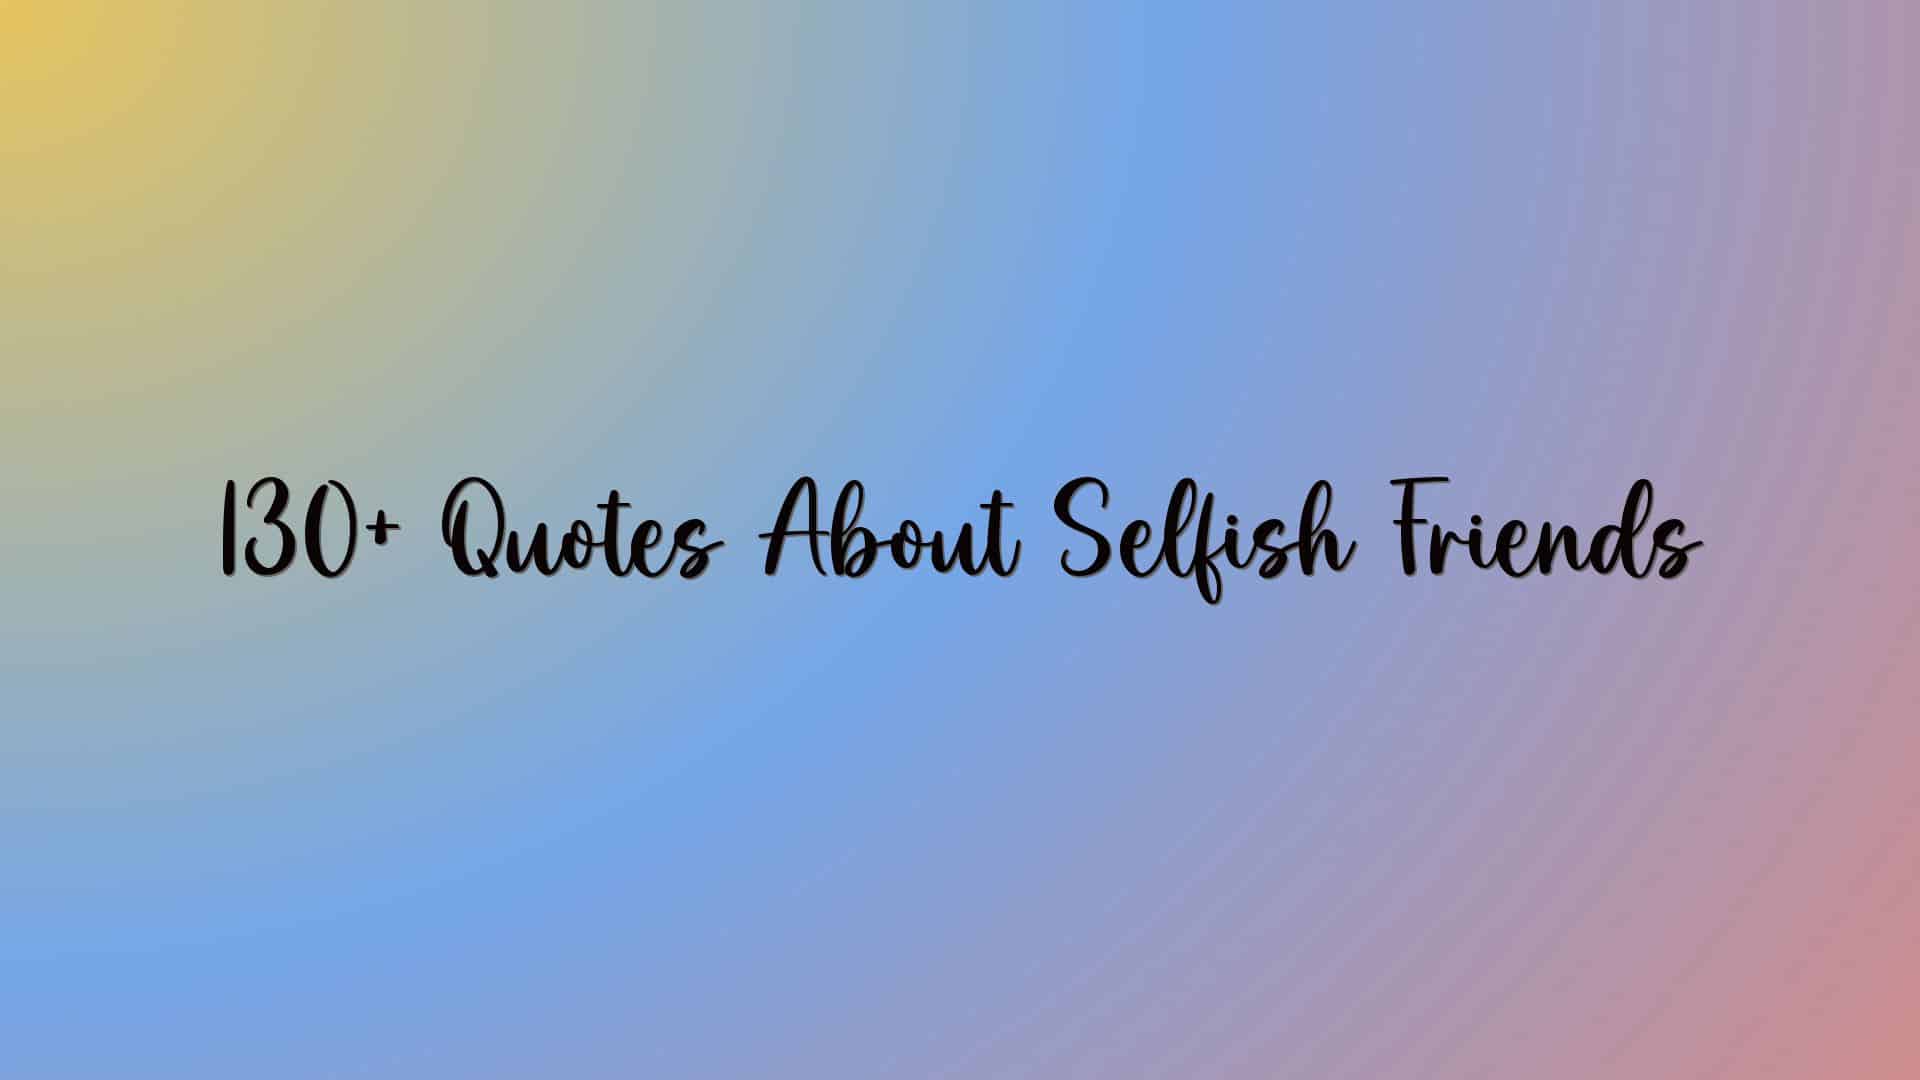 130+ Quotes About Selfish Friends